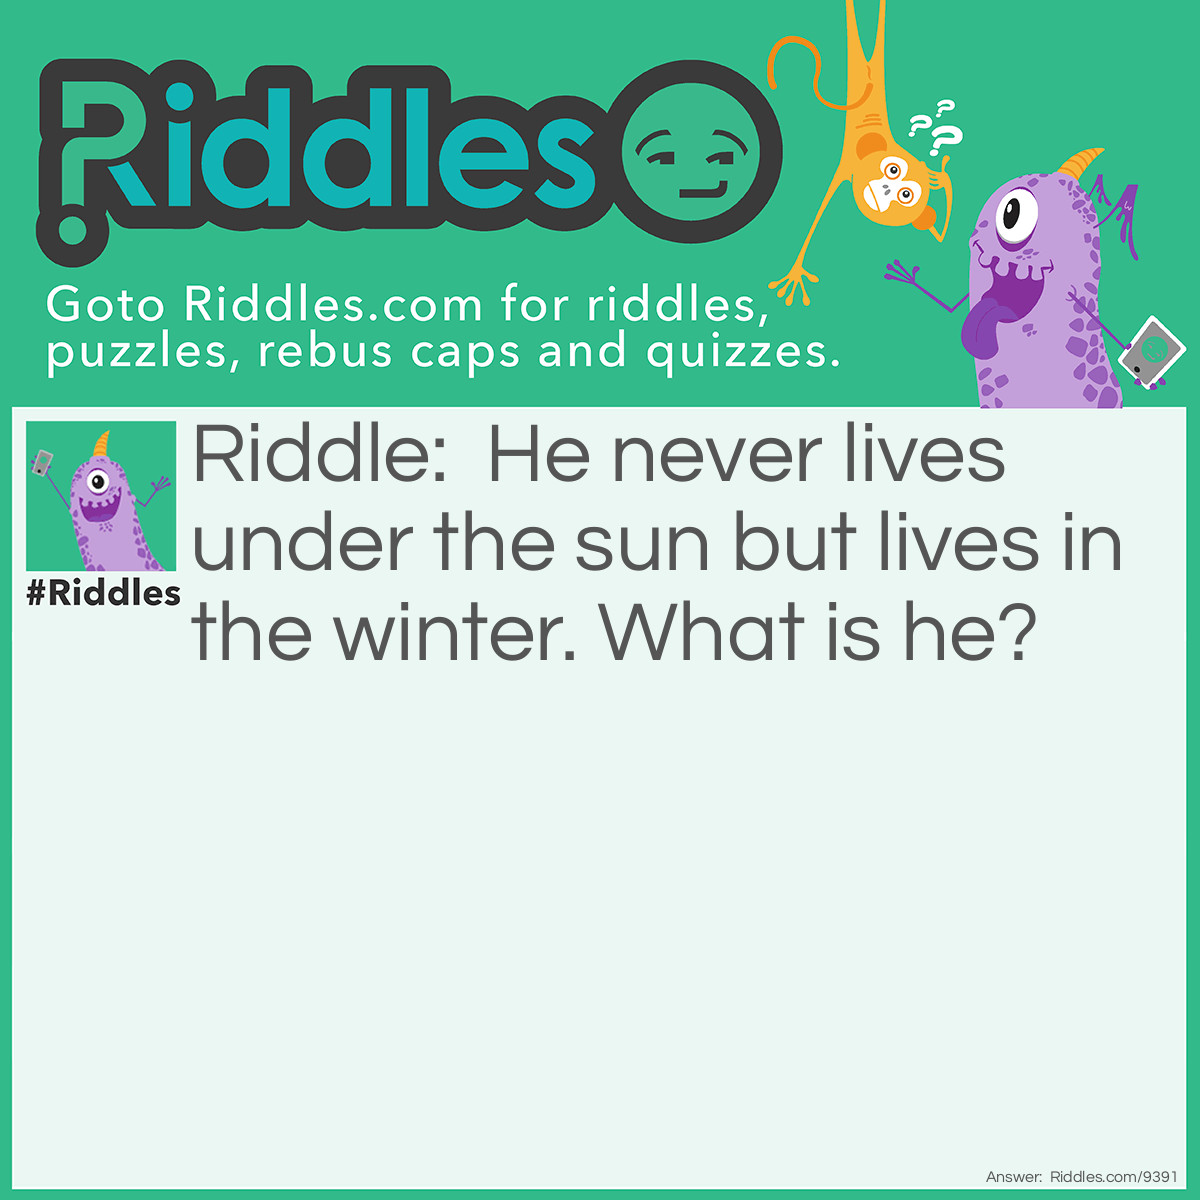 Riddle: He never lives under the sun but lives in the winter. What is he? Answer: A snowman.